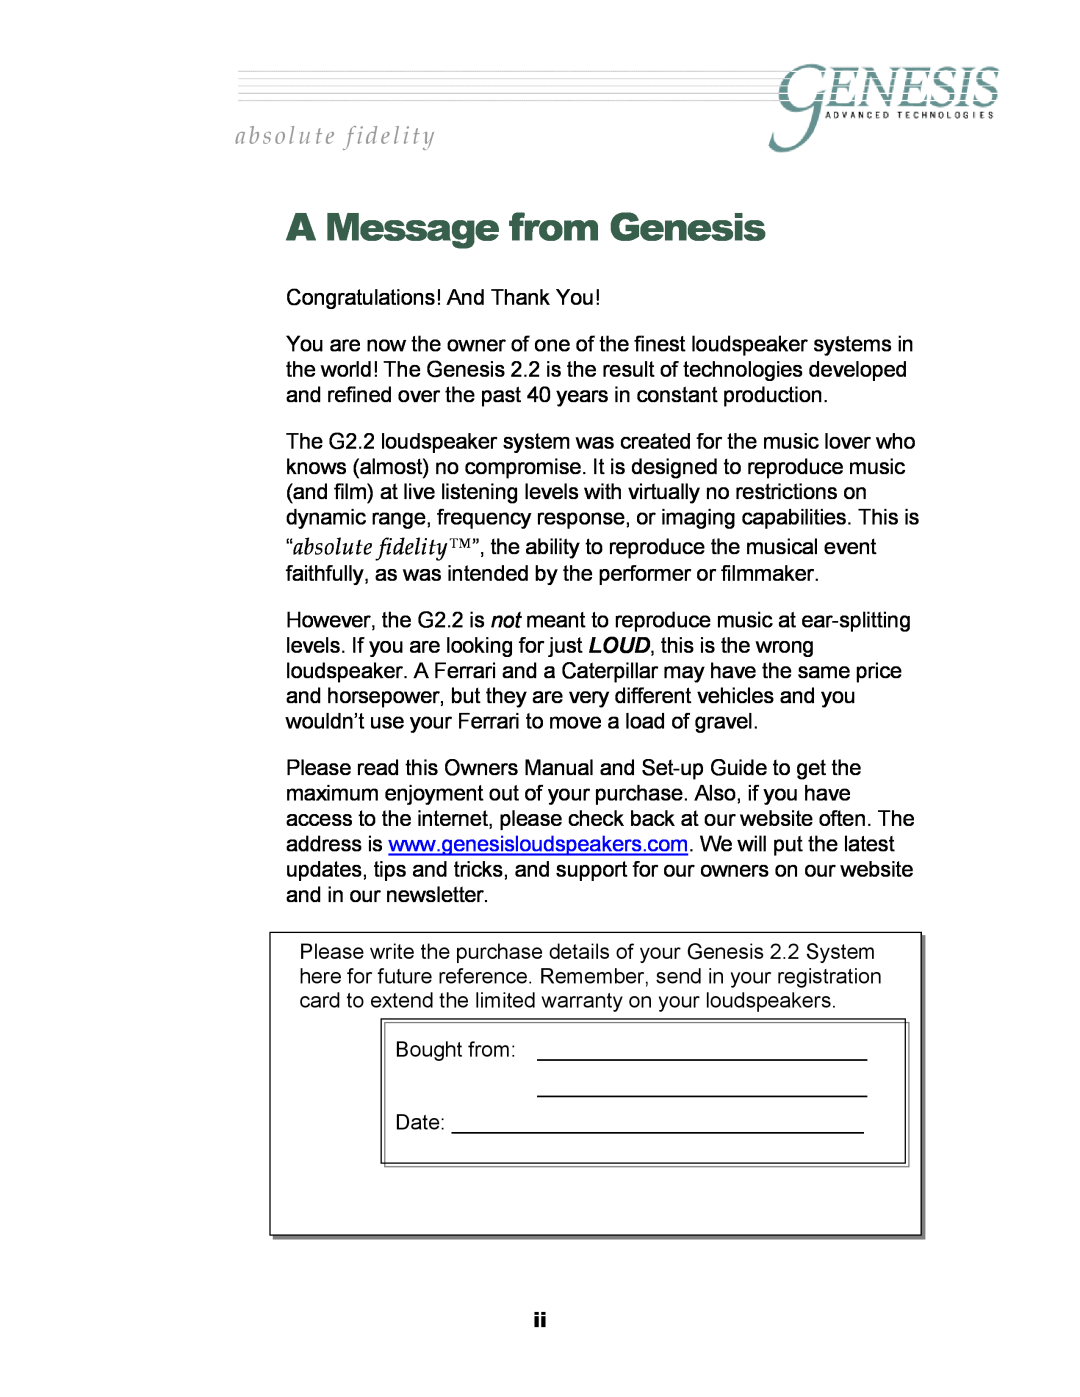 Genesis Advanced Technologies 2.2 manual A Message from Genesis, absolute fidelity 